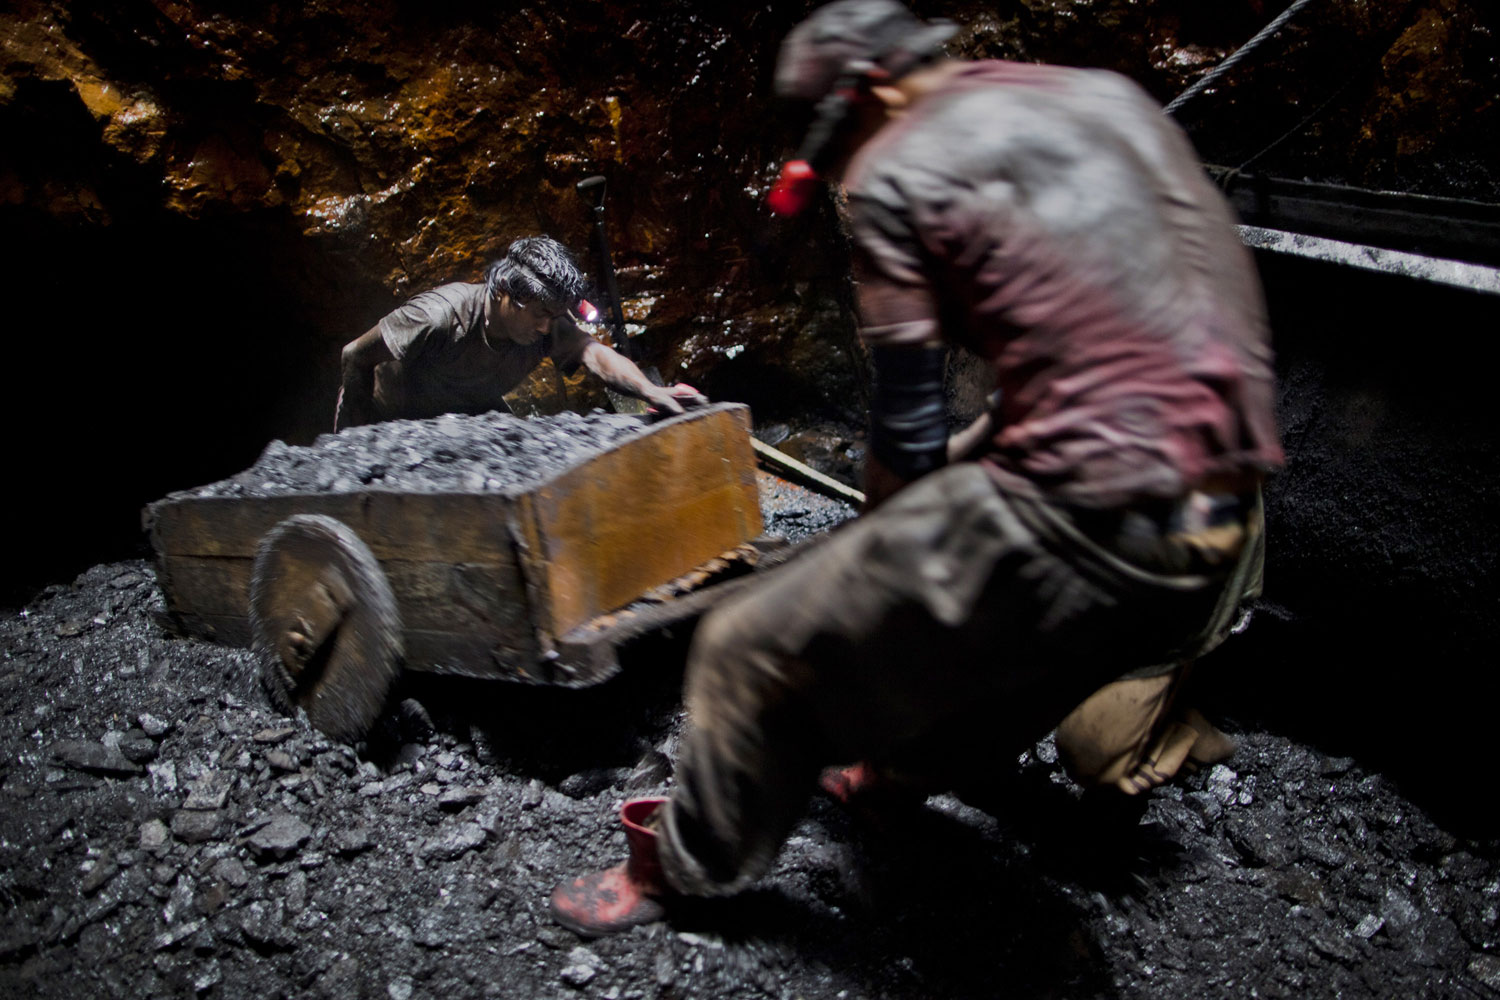 20 year old Anil Basnet pushes a coal cart, as he and a fellow worker pull coal out from the rat hole tunnel 300 ft below the surface.